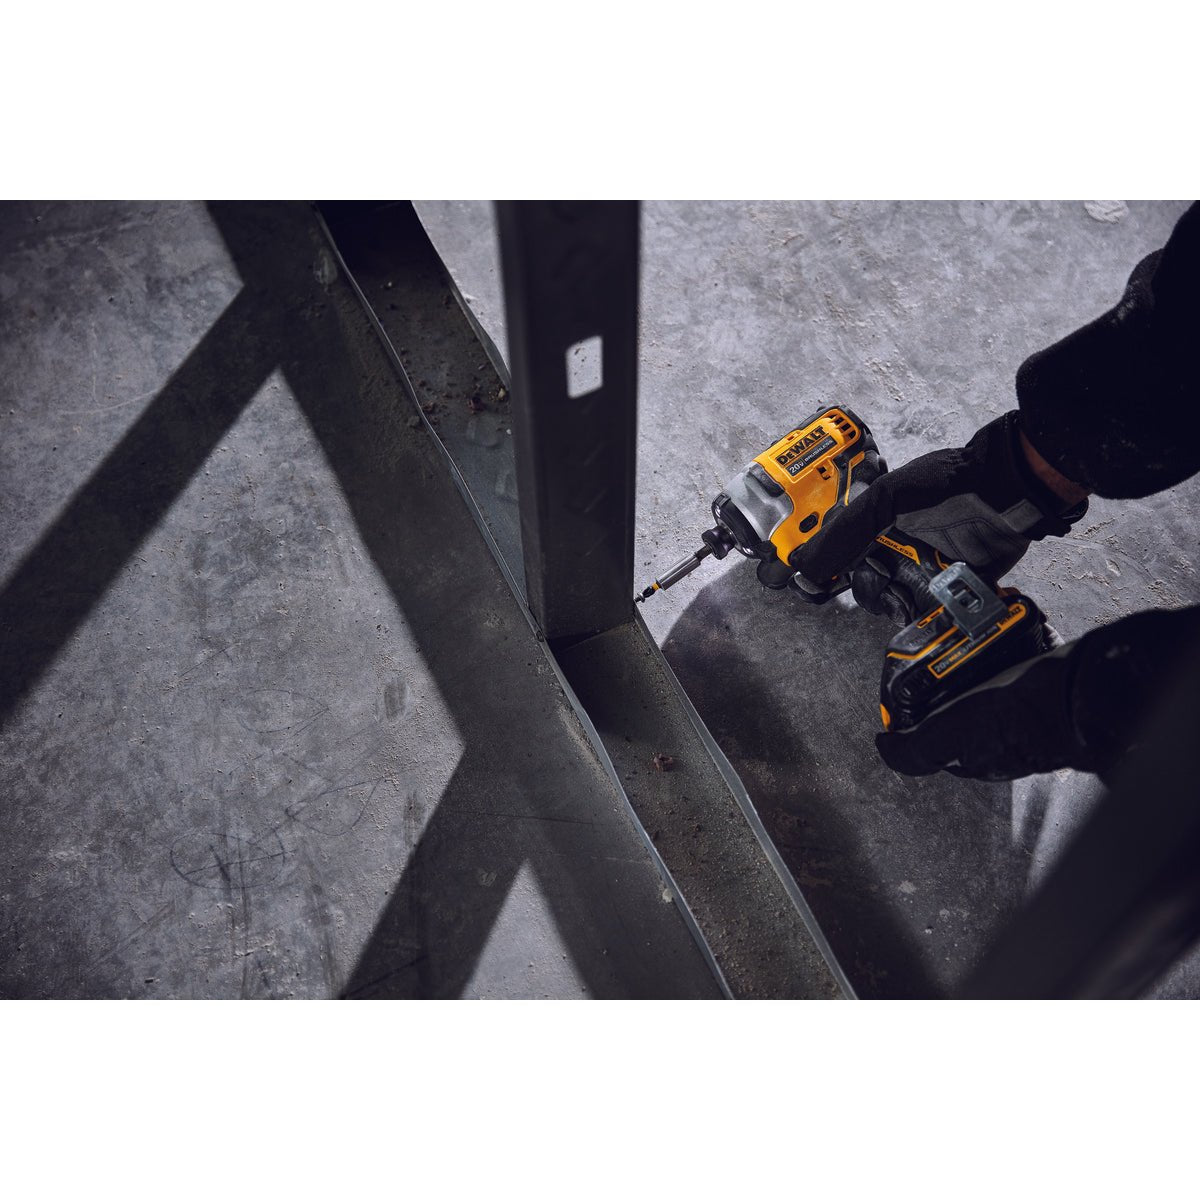 DEWALT DCF809B ATOMIC 20V MAX* BRUSHLESS CORDLESS COMPACT 1/4 IN. IMPACT DRIVER (TOOL ONLY)